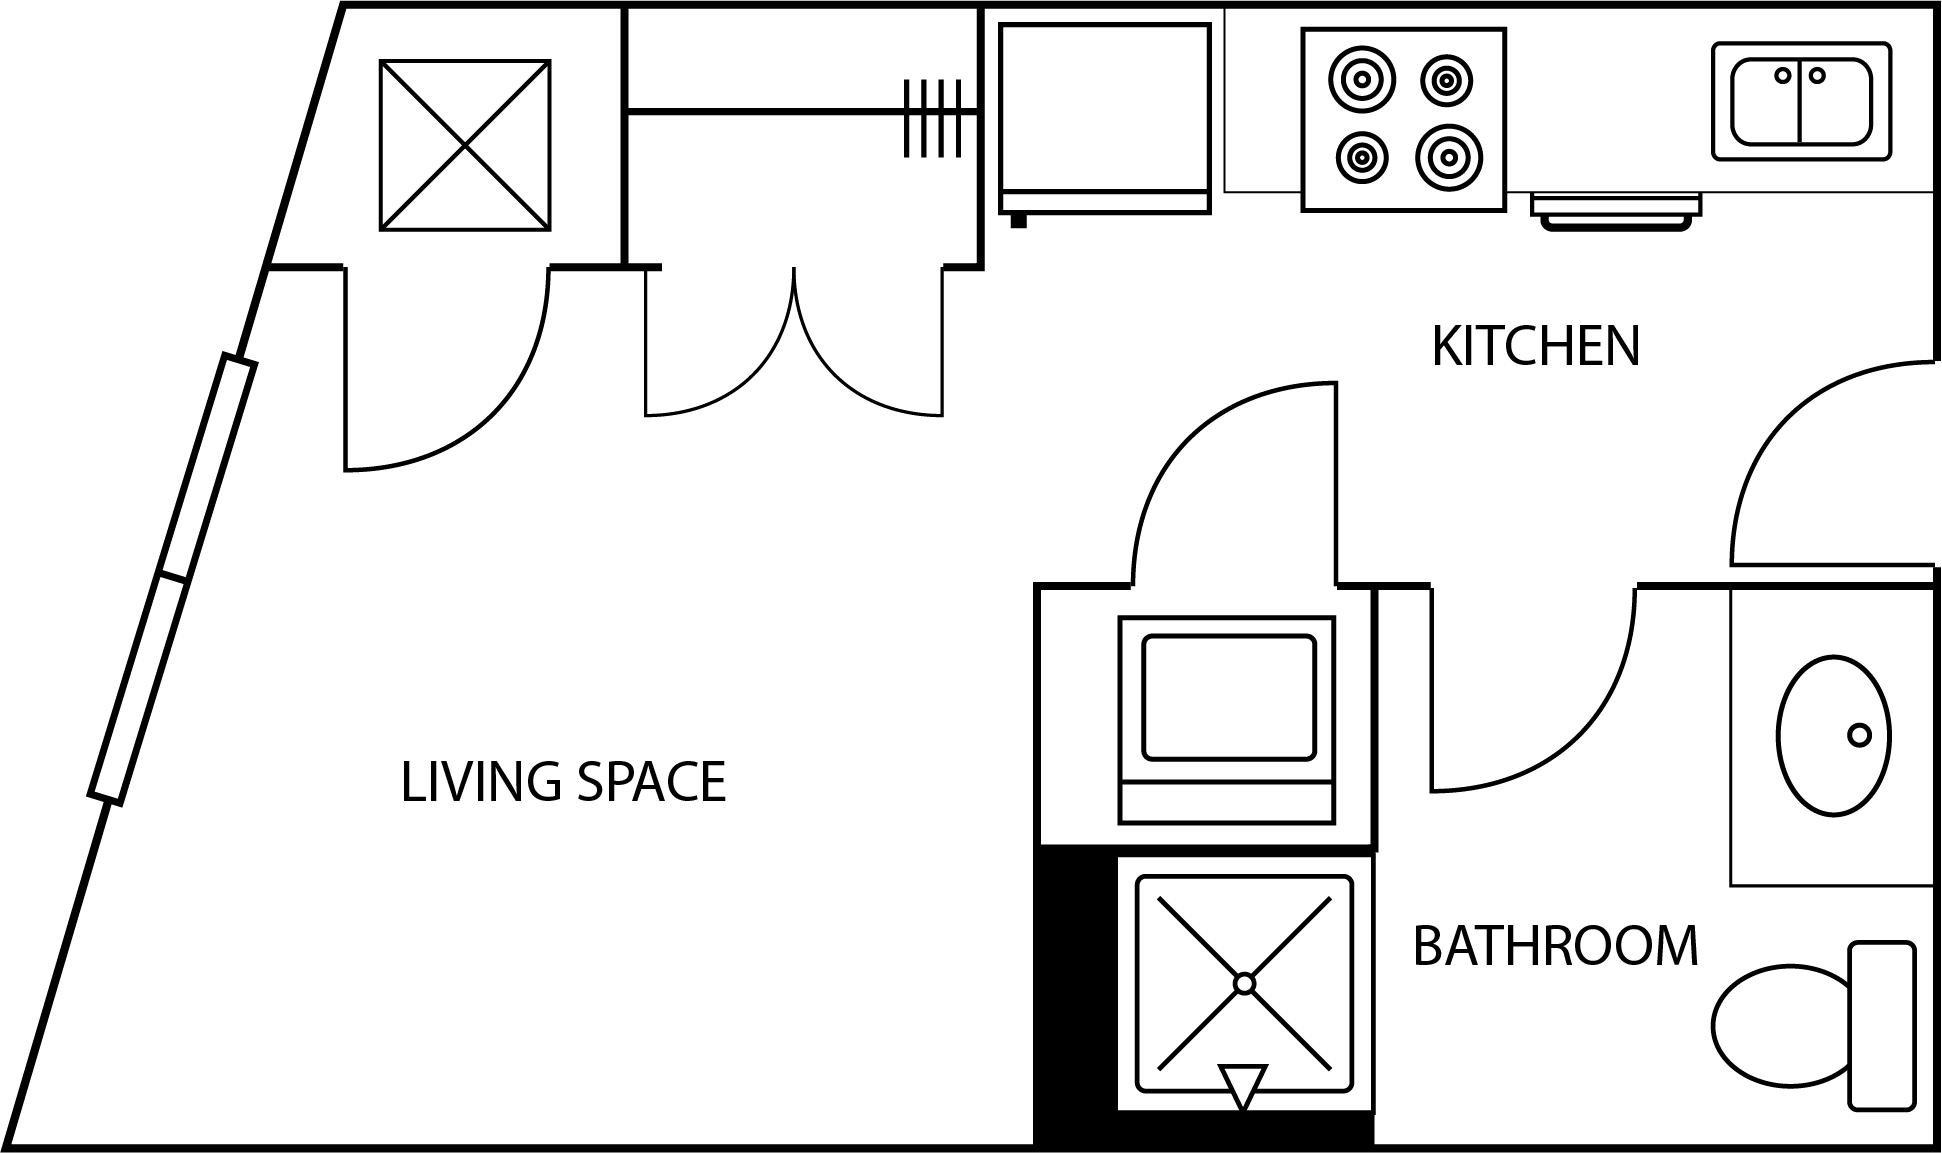 Illustration of Aspire's Expedition Floor plan, a studio apartment for 1 Person